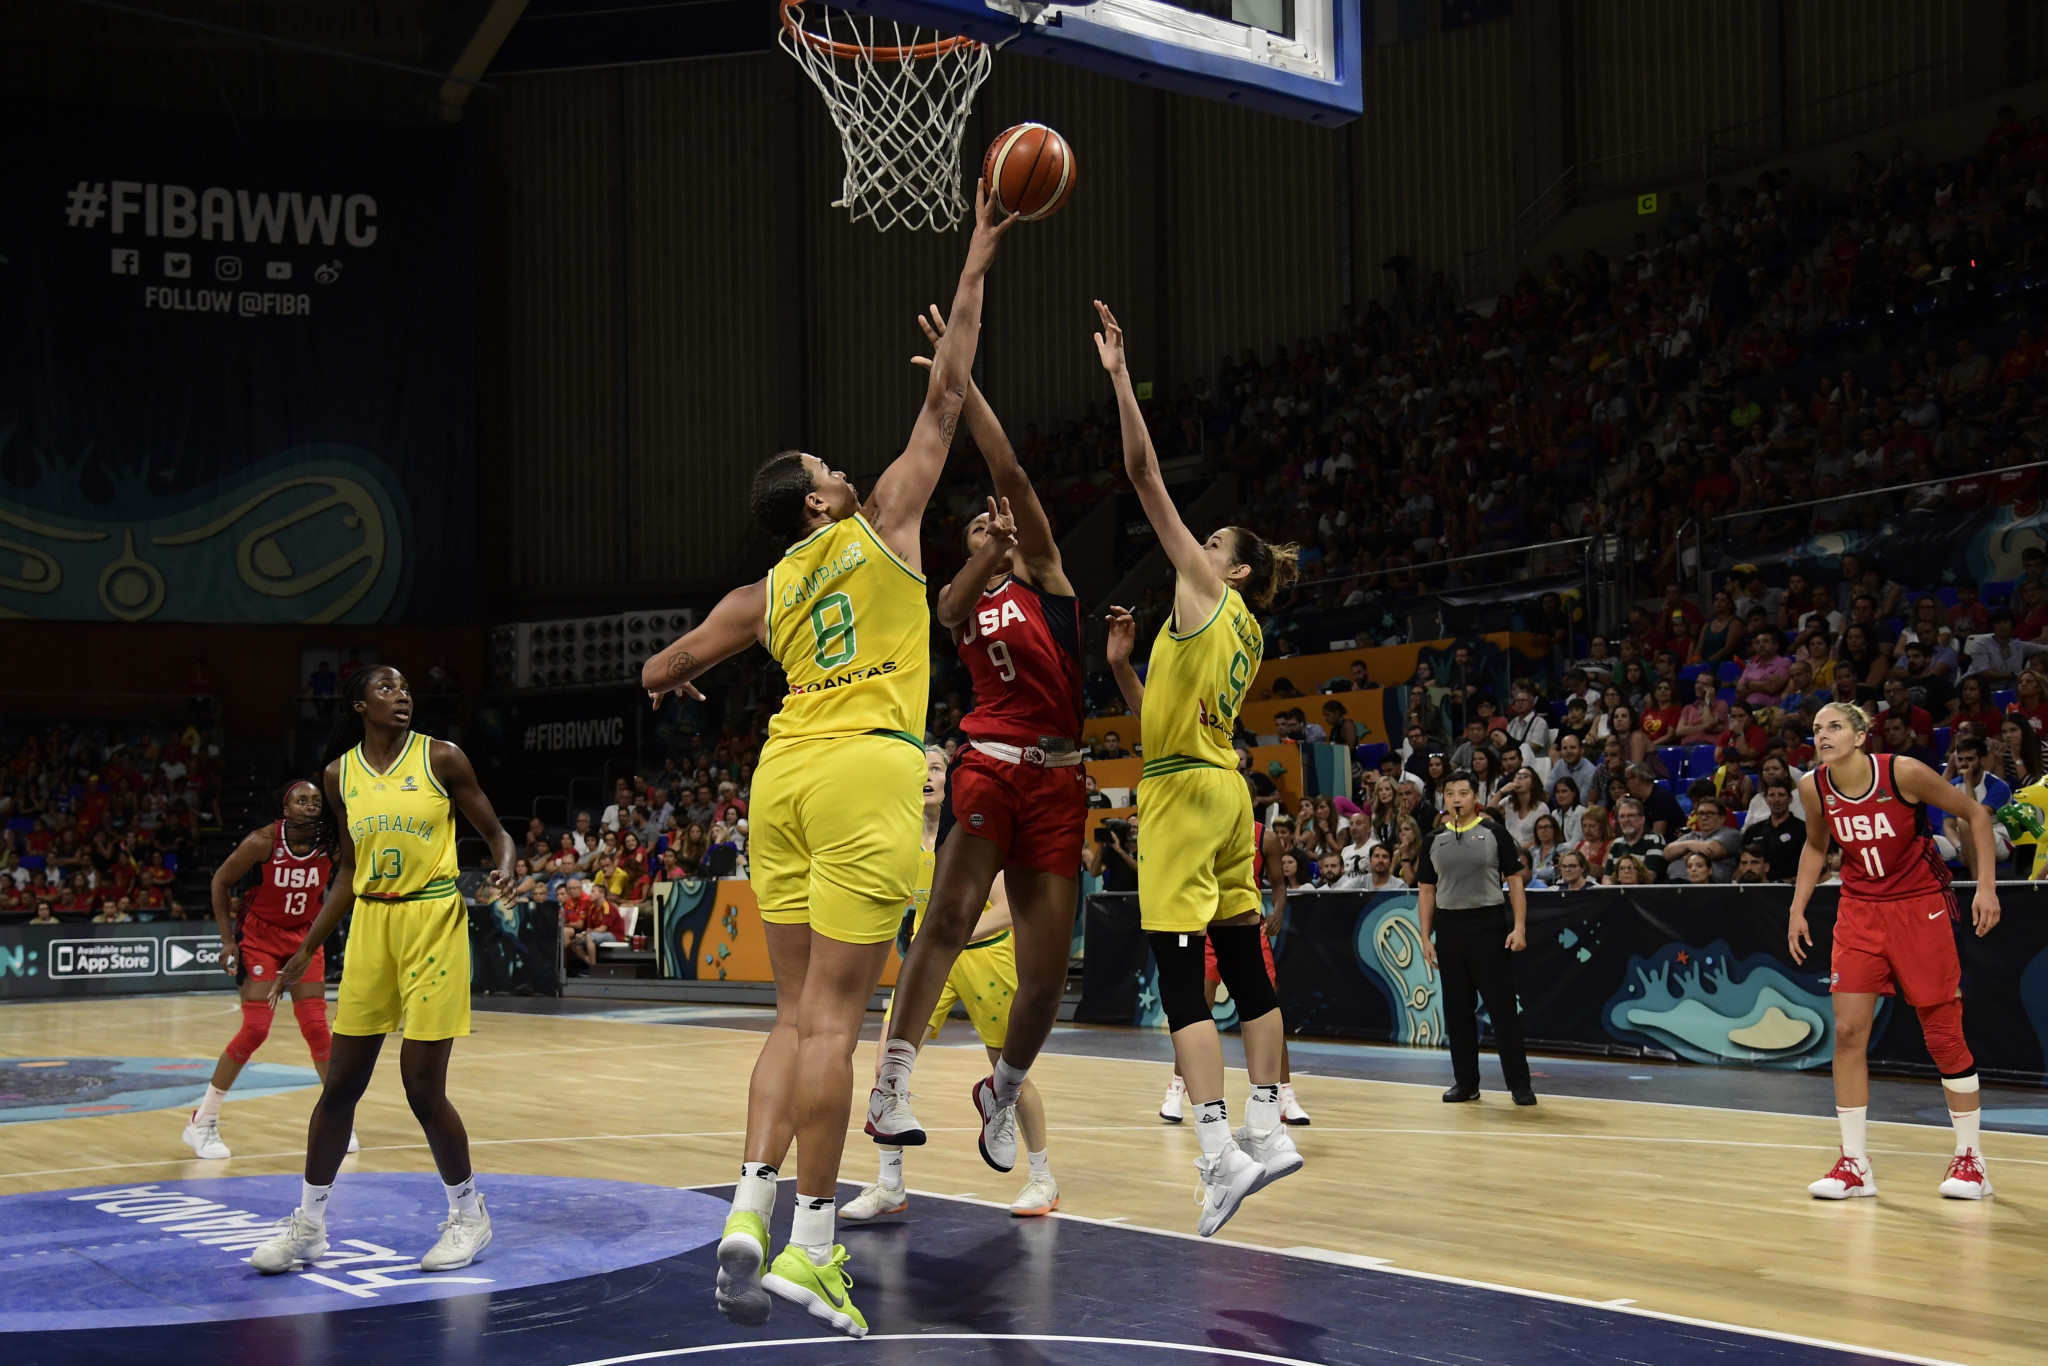 FIBA Women's World Cup schedule unaffected by national day of mourning